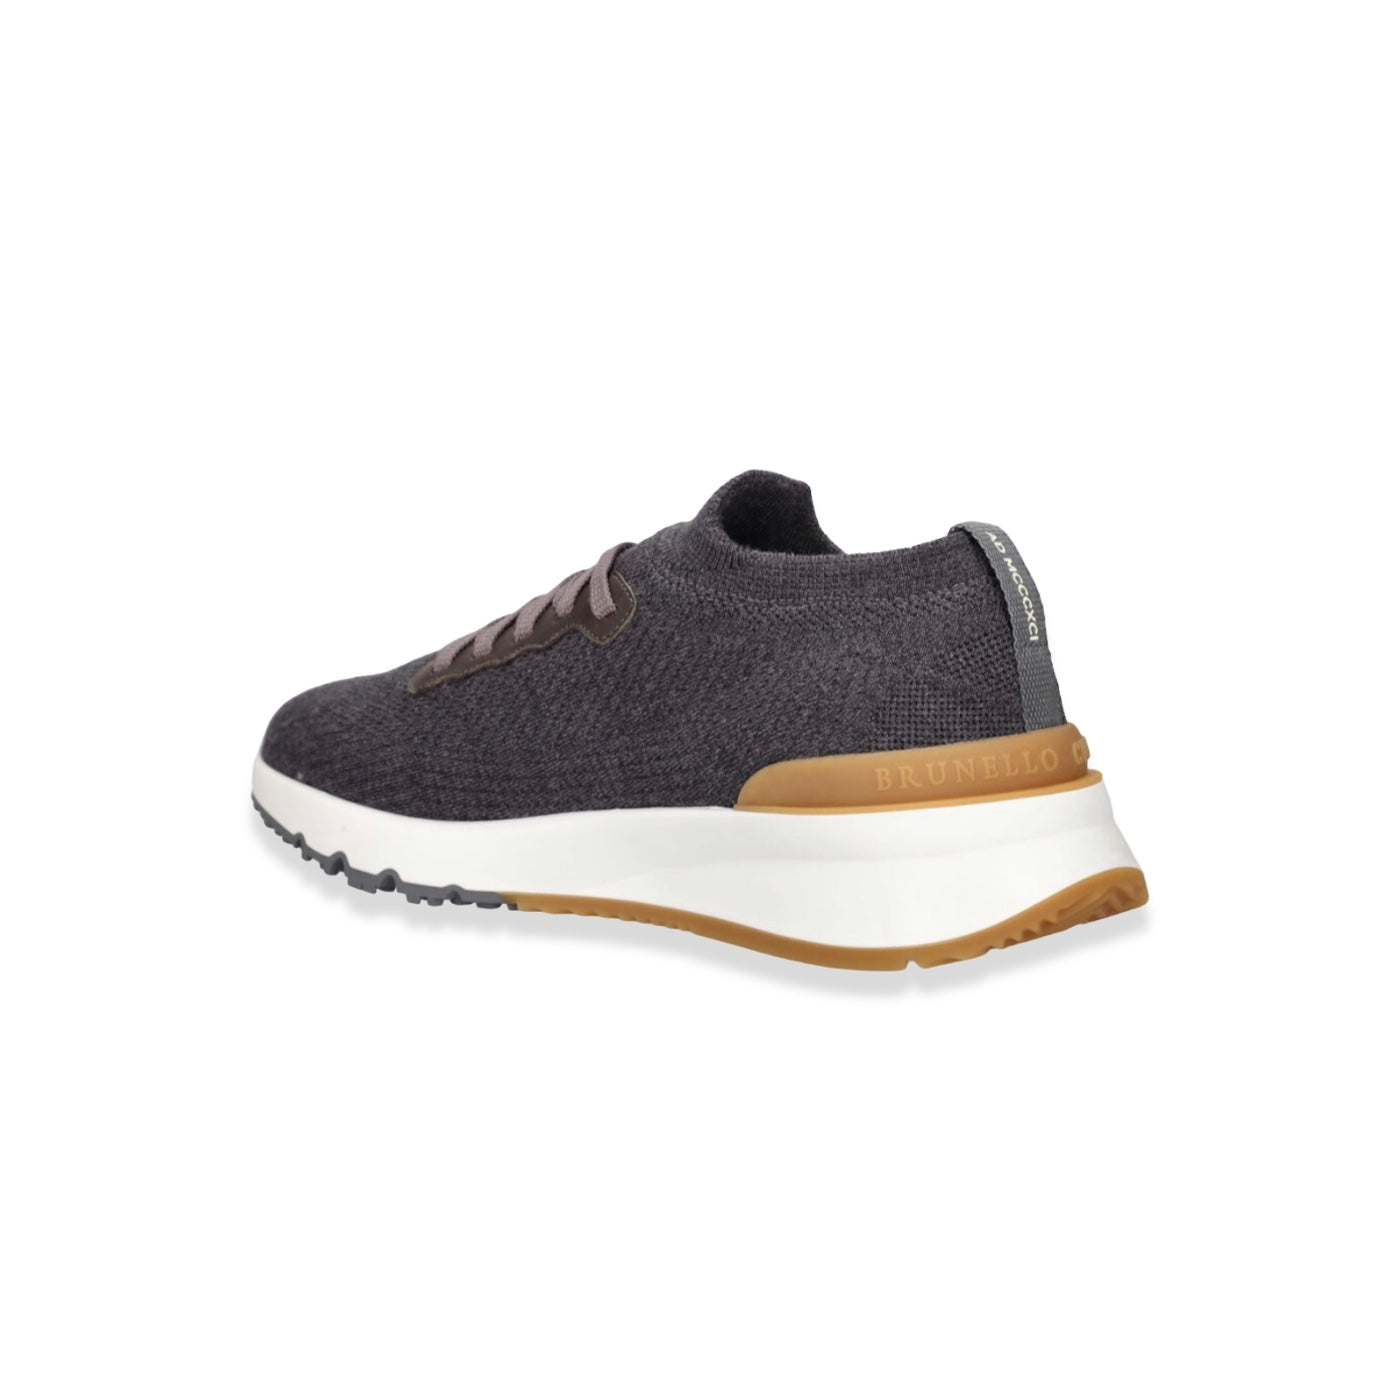 Brunello Cucinelli - Wool Knitted Runners Grey